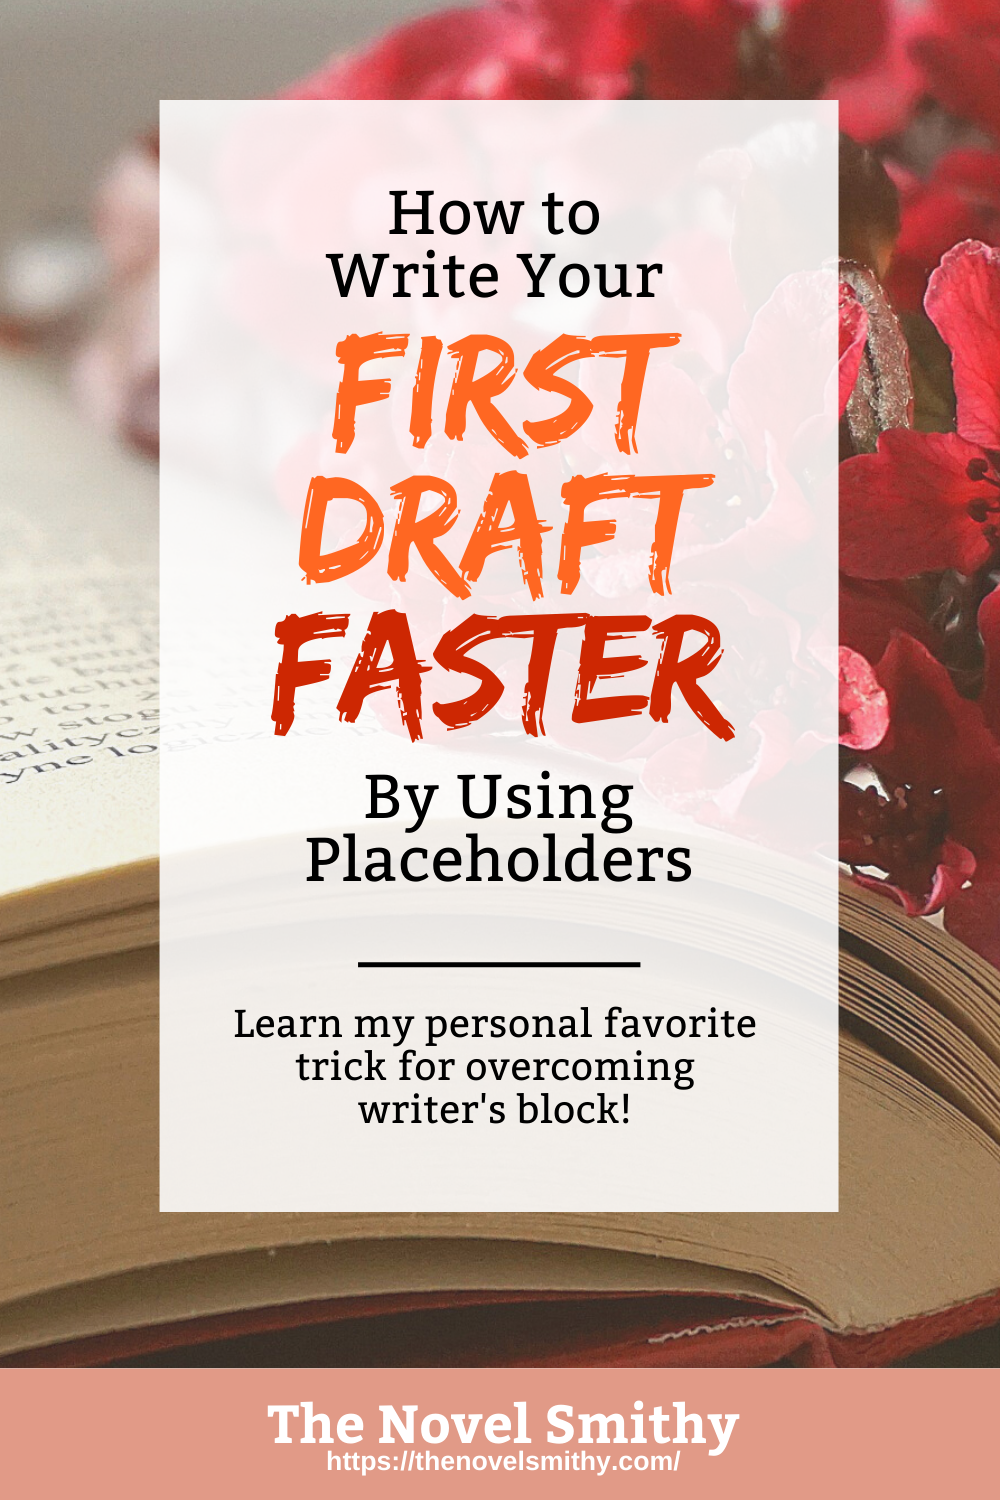 Writing Your First Draft Faster: The Power of Placeholders